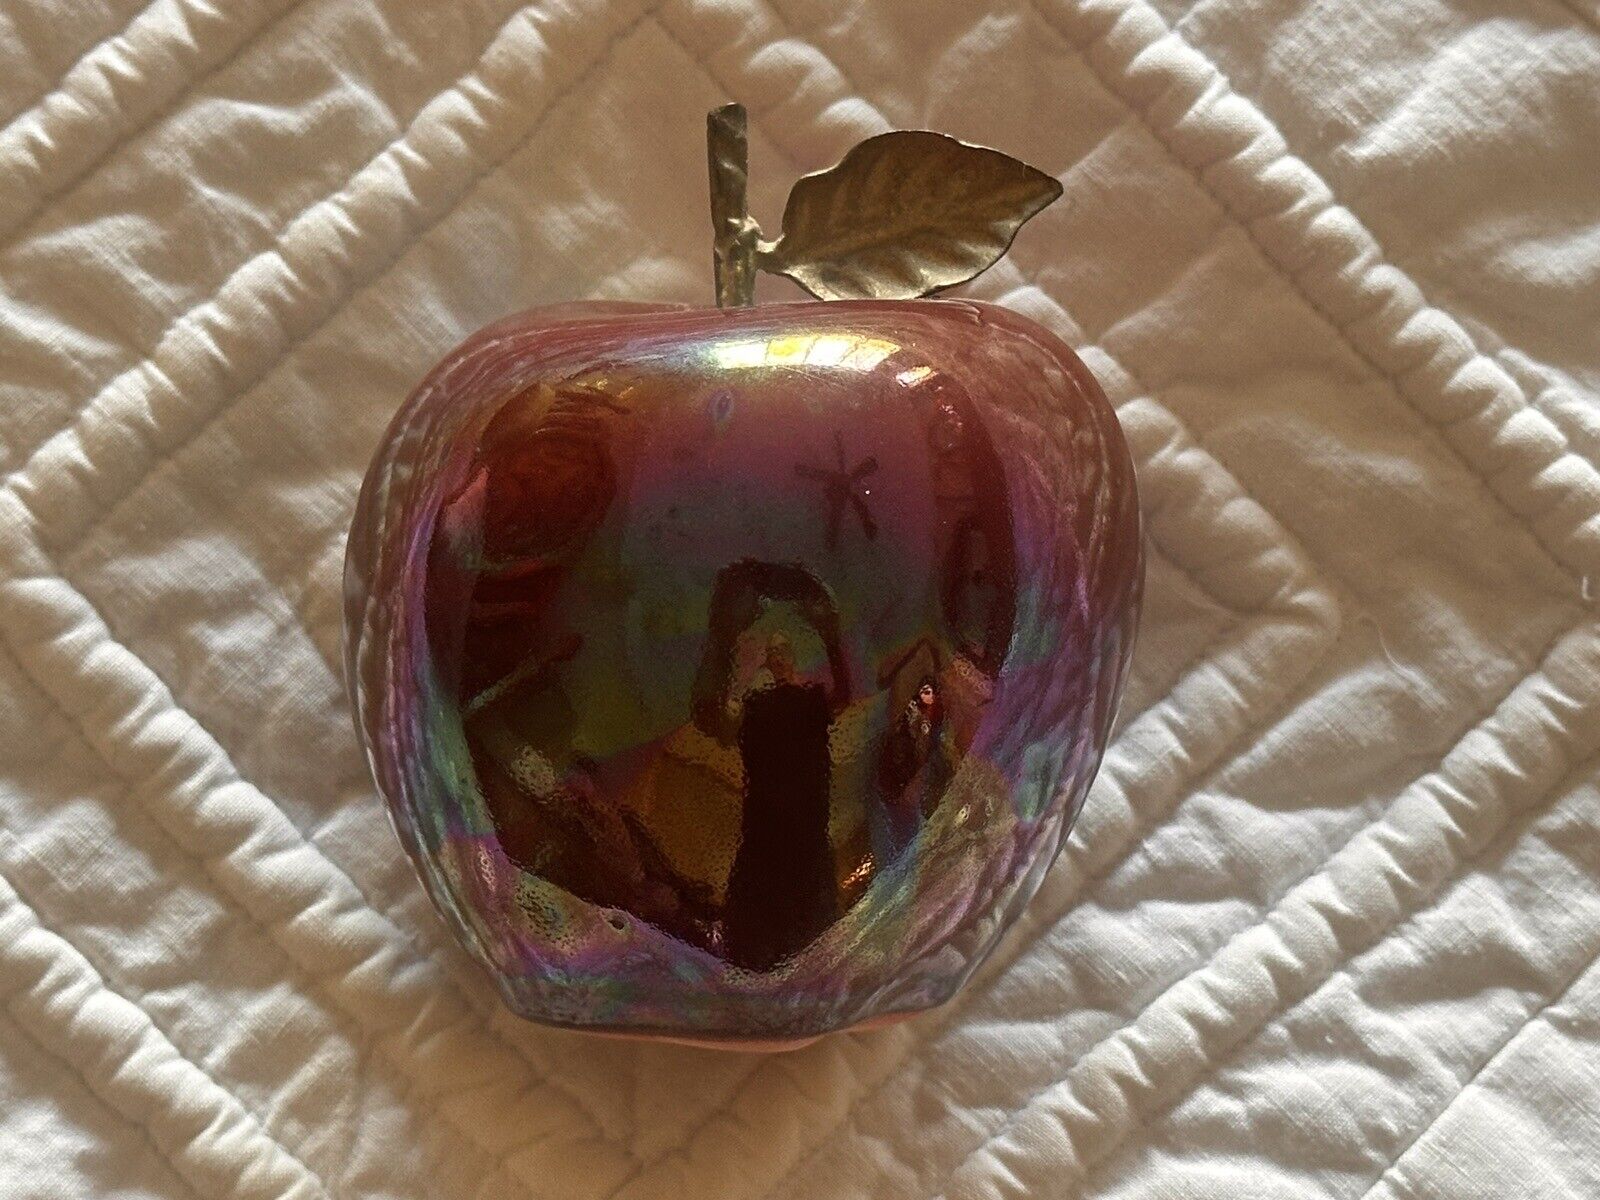 Collectable ceramic apple by Greek sculptor Yanni